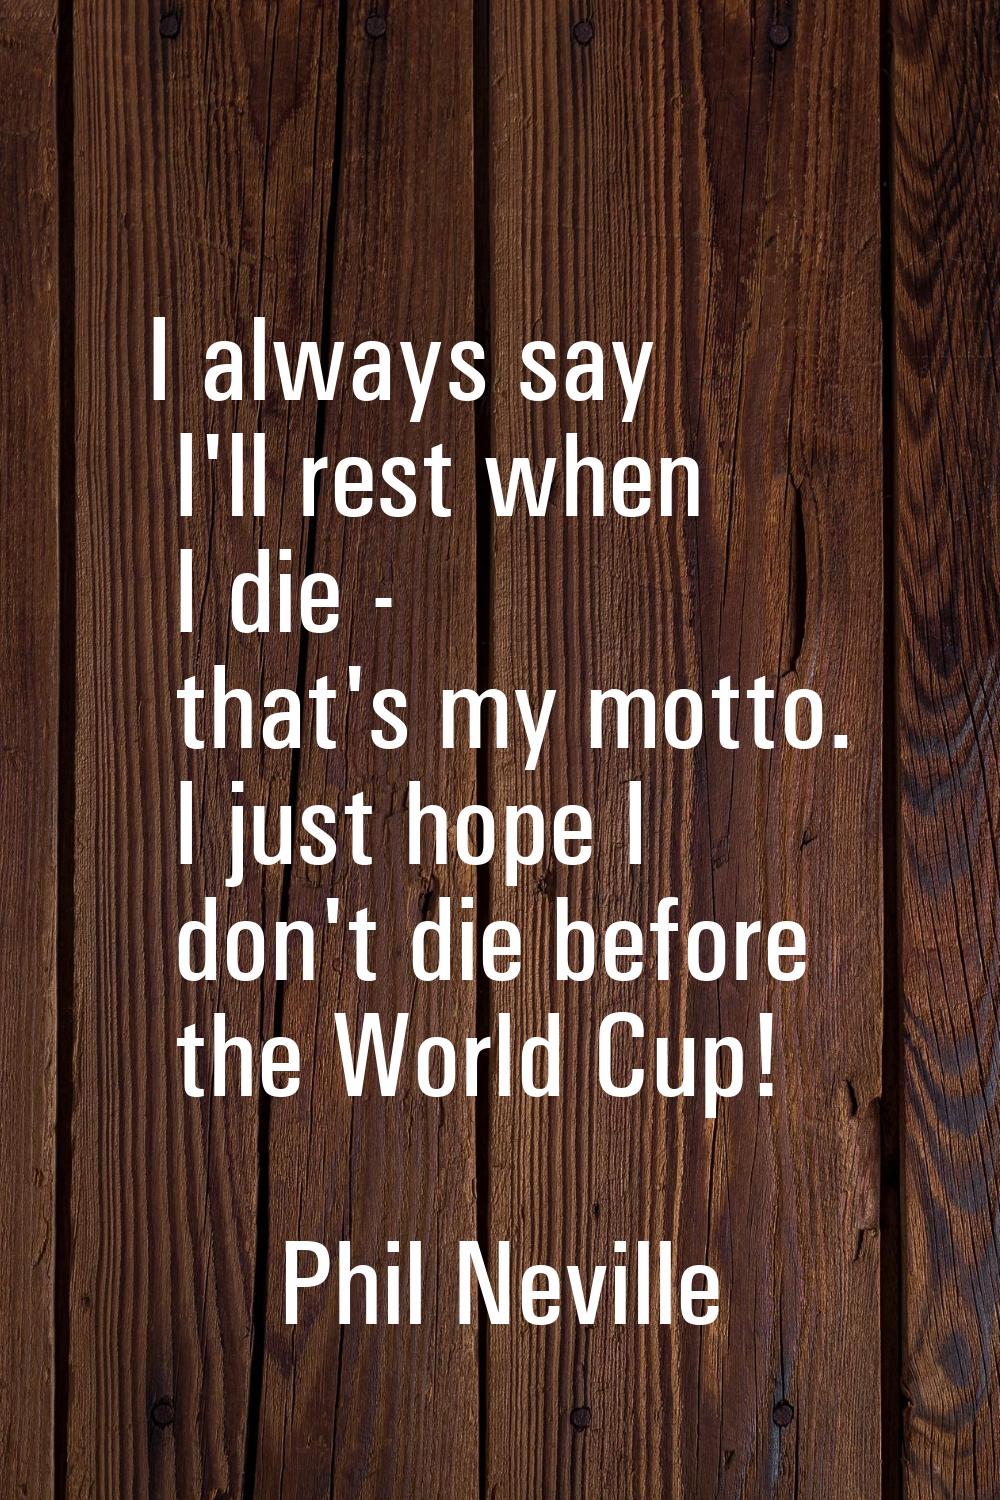 I always say I'll rest when I die - that's my motto. I just hope I don't die before the World Cup!